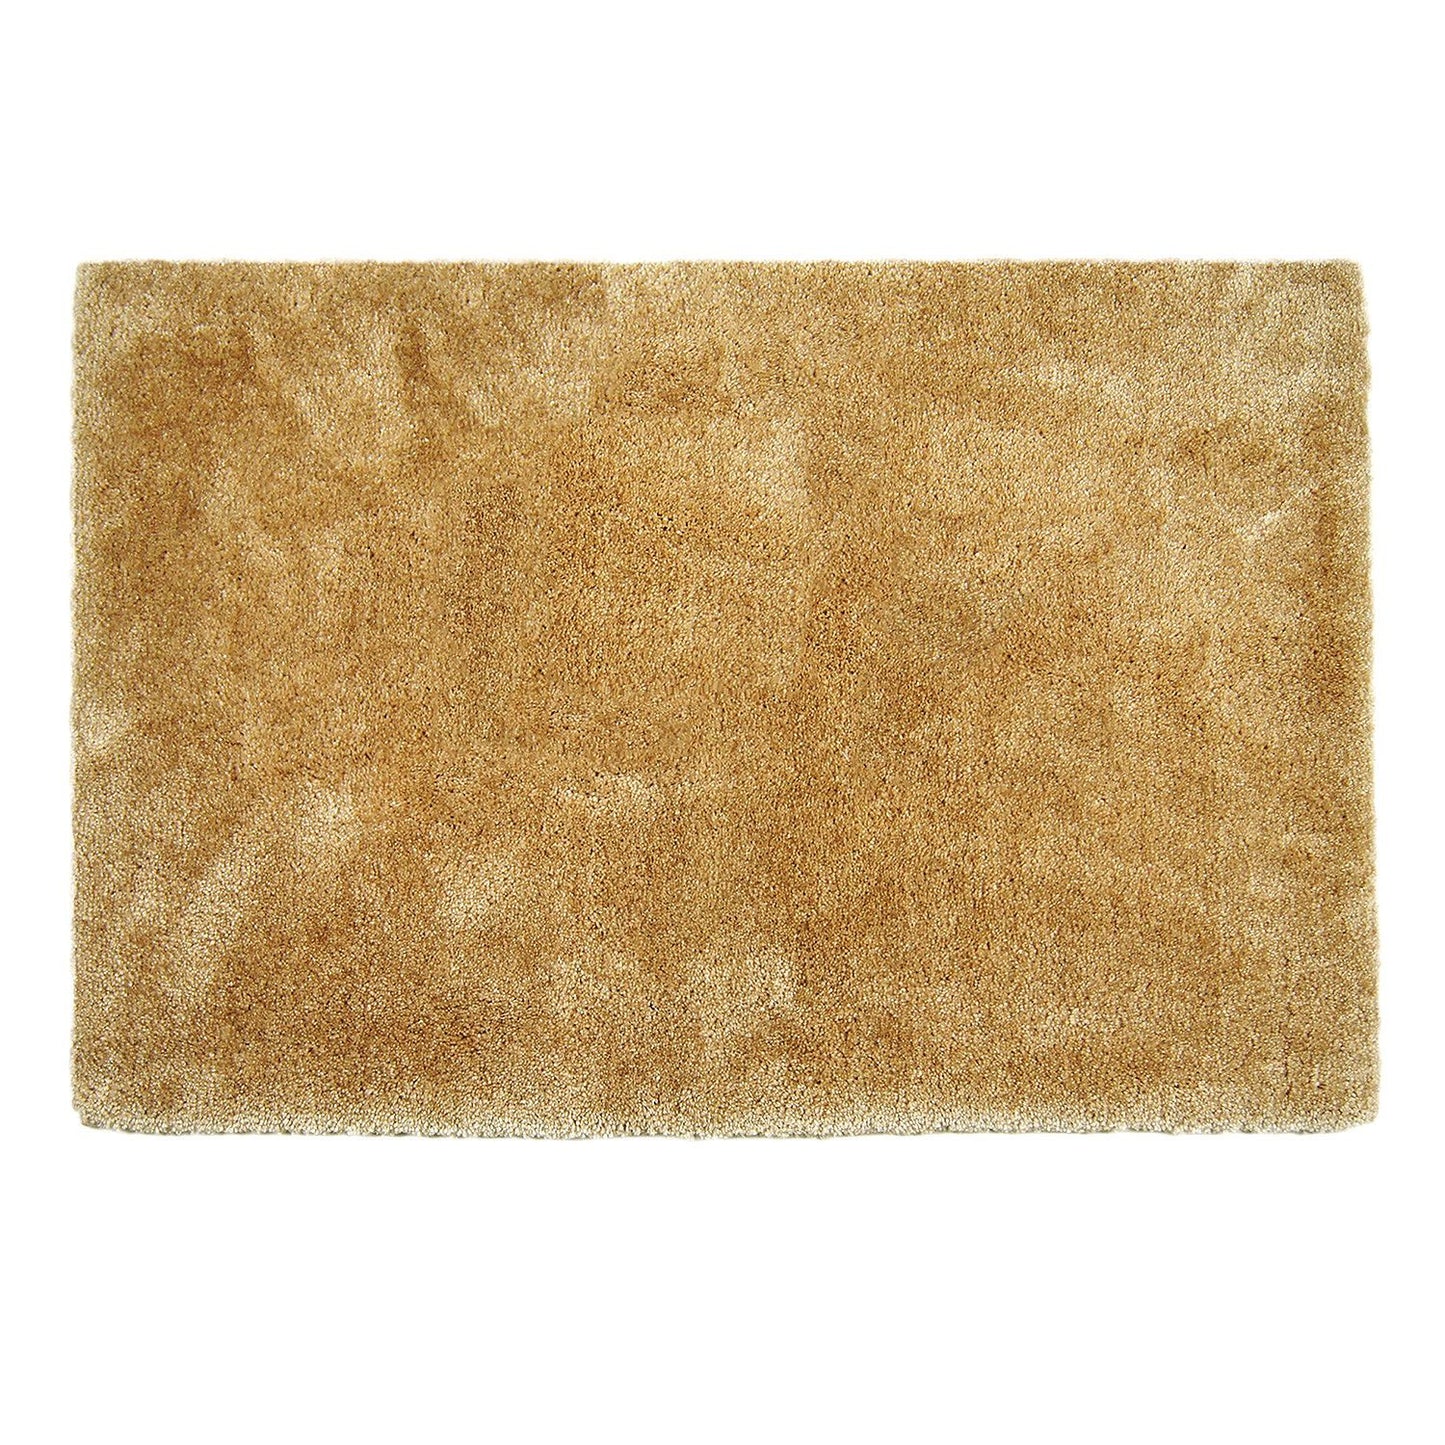 Hotel Luxury Reserve Collection Bath Rug 24" x 36" (Assorted Colors)